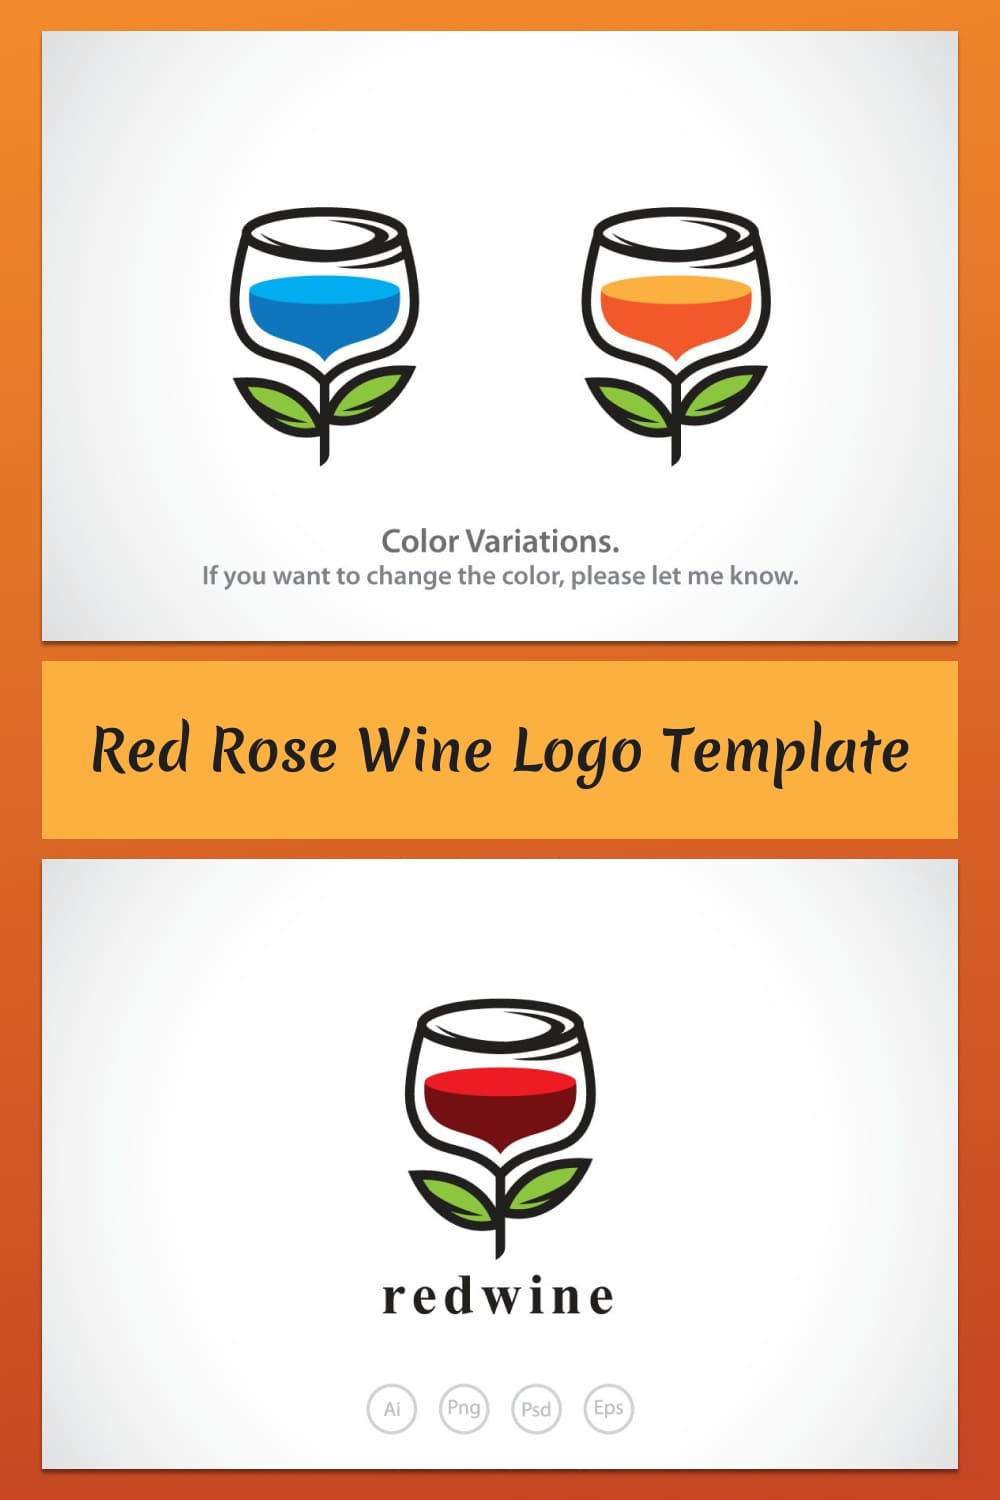 Red Rose Wine Logo Template - Pinterest Image Preview.